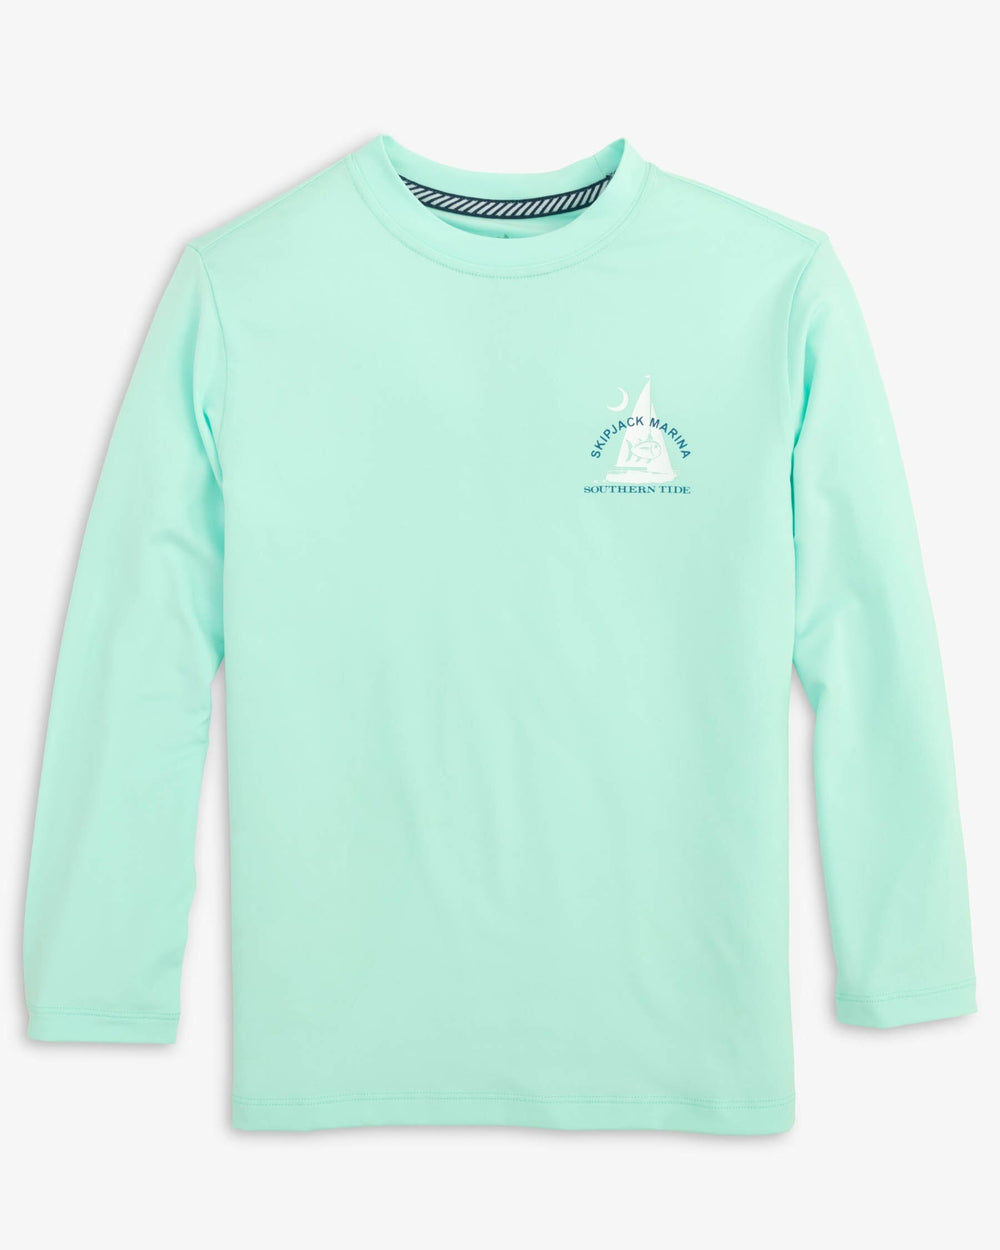 The front view of the Southern Tide Youth Skipjack Marina Long Sleeve Performance T-Shirt by Southern Tide - Baltic Teal